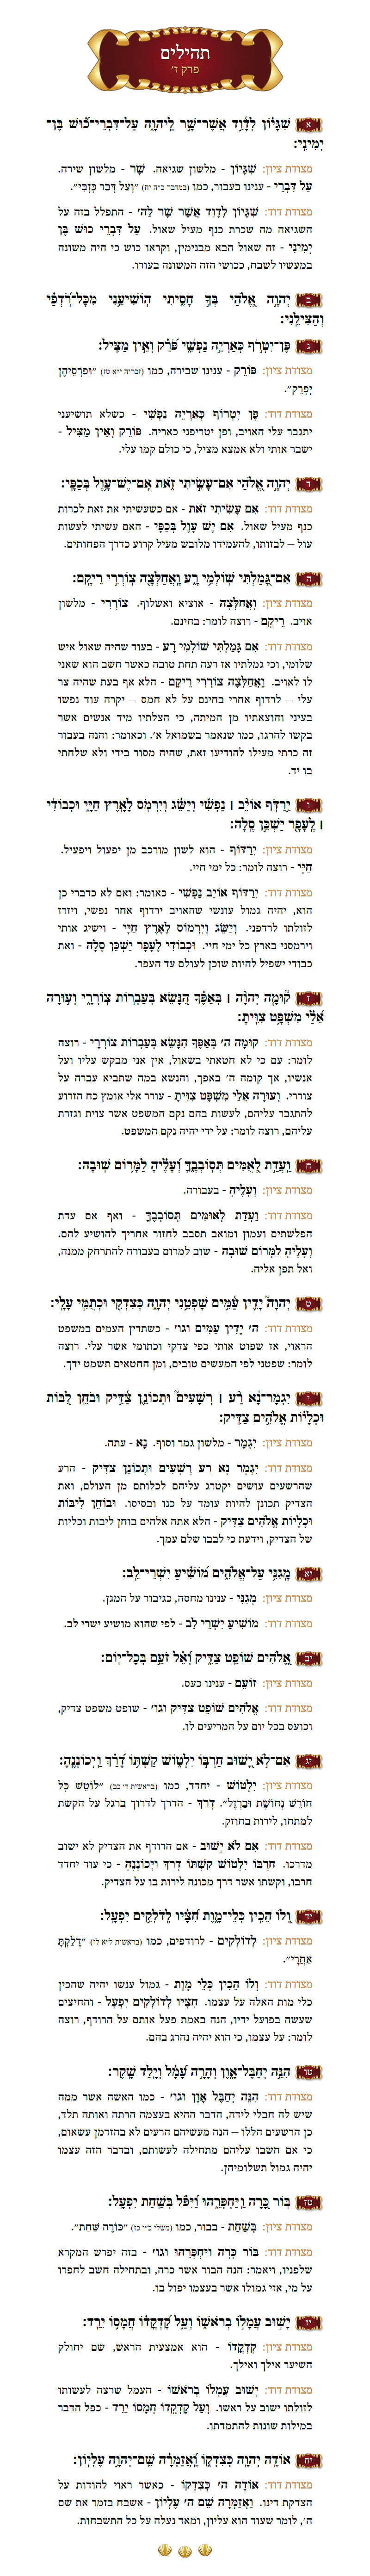 Sefer Tehillim Chapter 7 with commentary